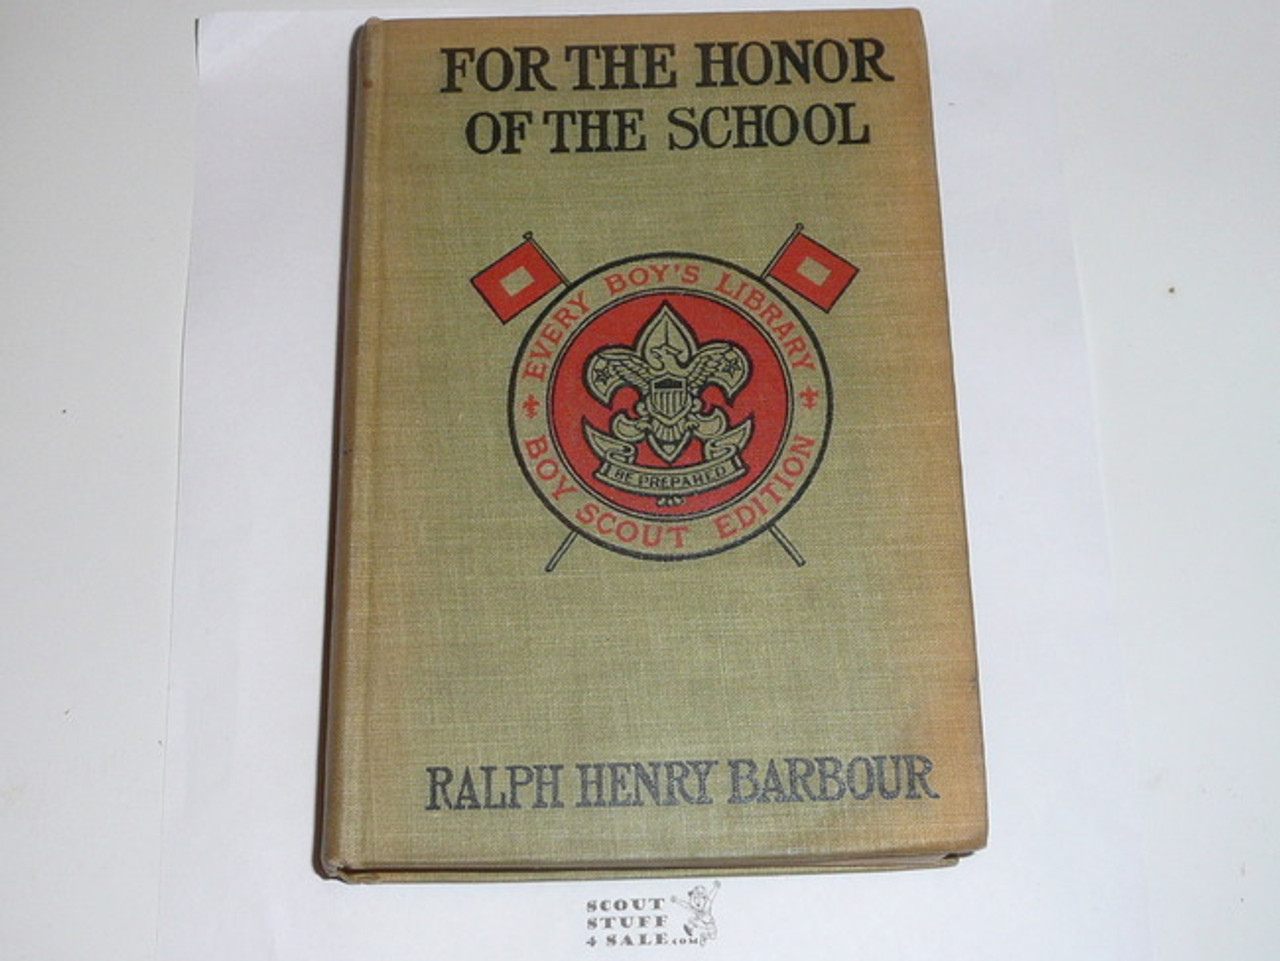 For the Honor of the School, By Ralph Henry Barbour, 1913, Every Boy's Library Edition, Type Two Binding